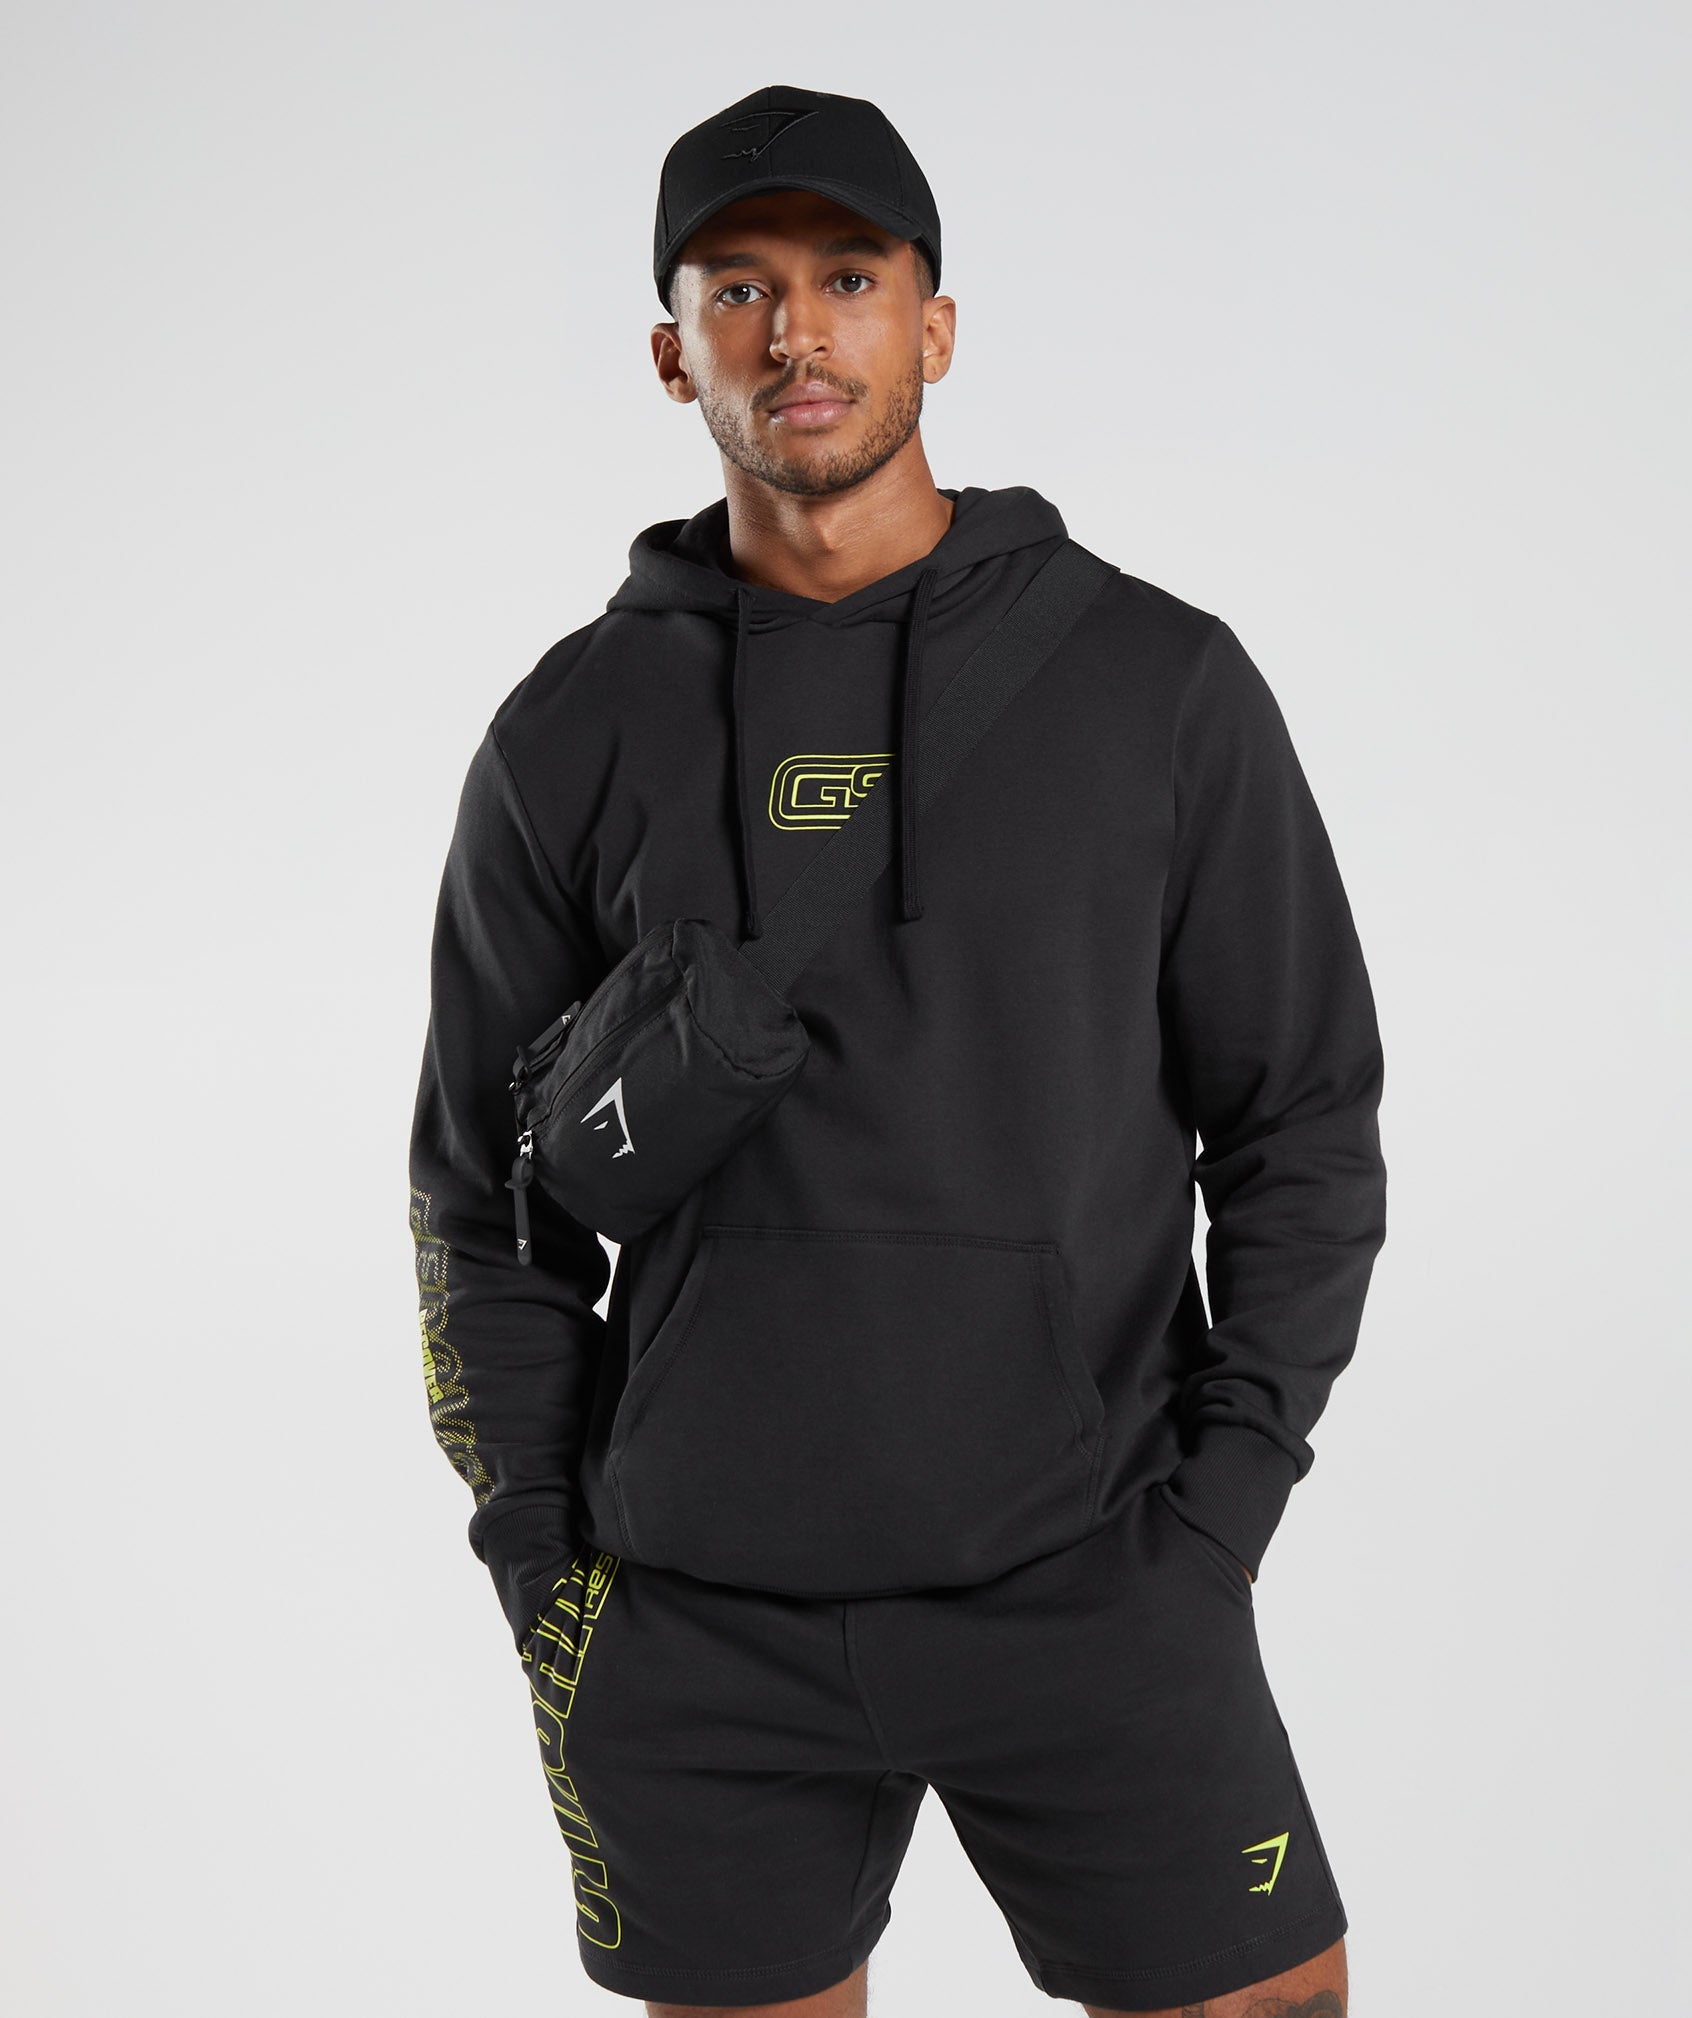 Recovery Graphic Hoodie in Black - view 4